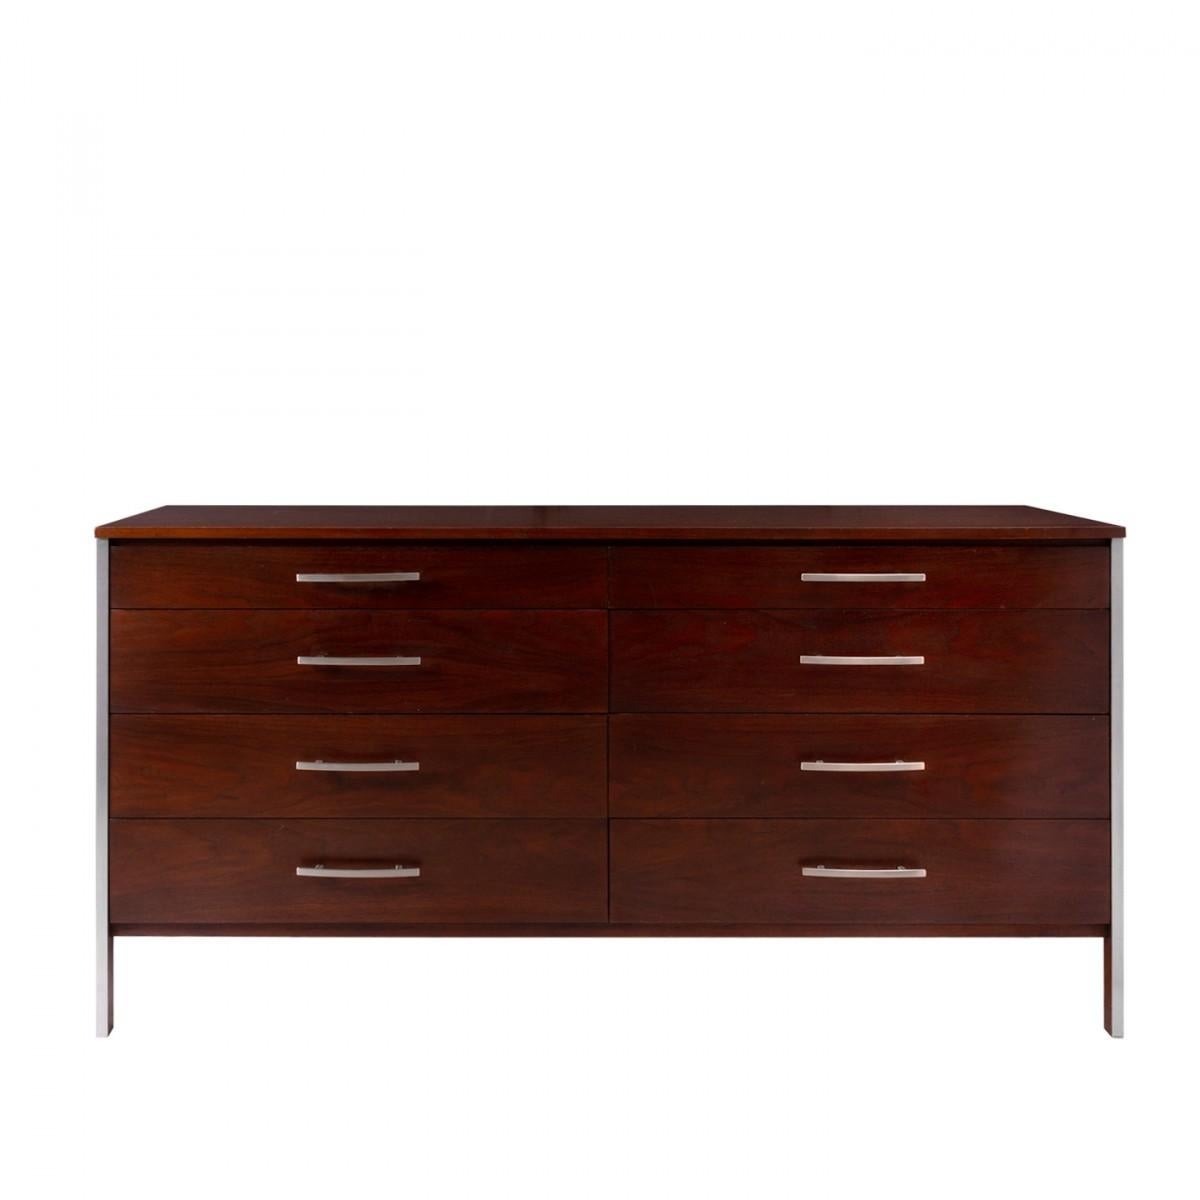 A walnut dresser with eight drawers, complemented by a steel frame and hardware. Designed by Paul McCobb for Calvin Furniture. Signed. USA, circa 1950.

Dimensions: 66